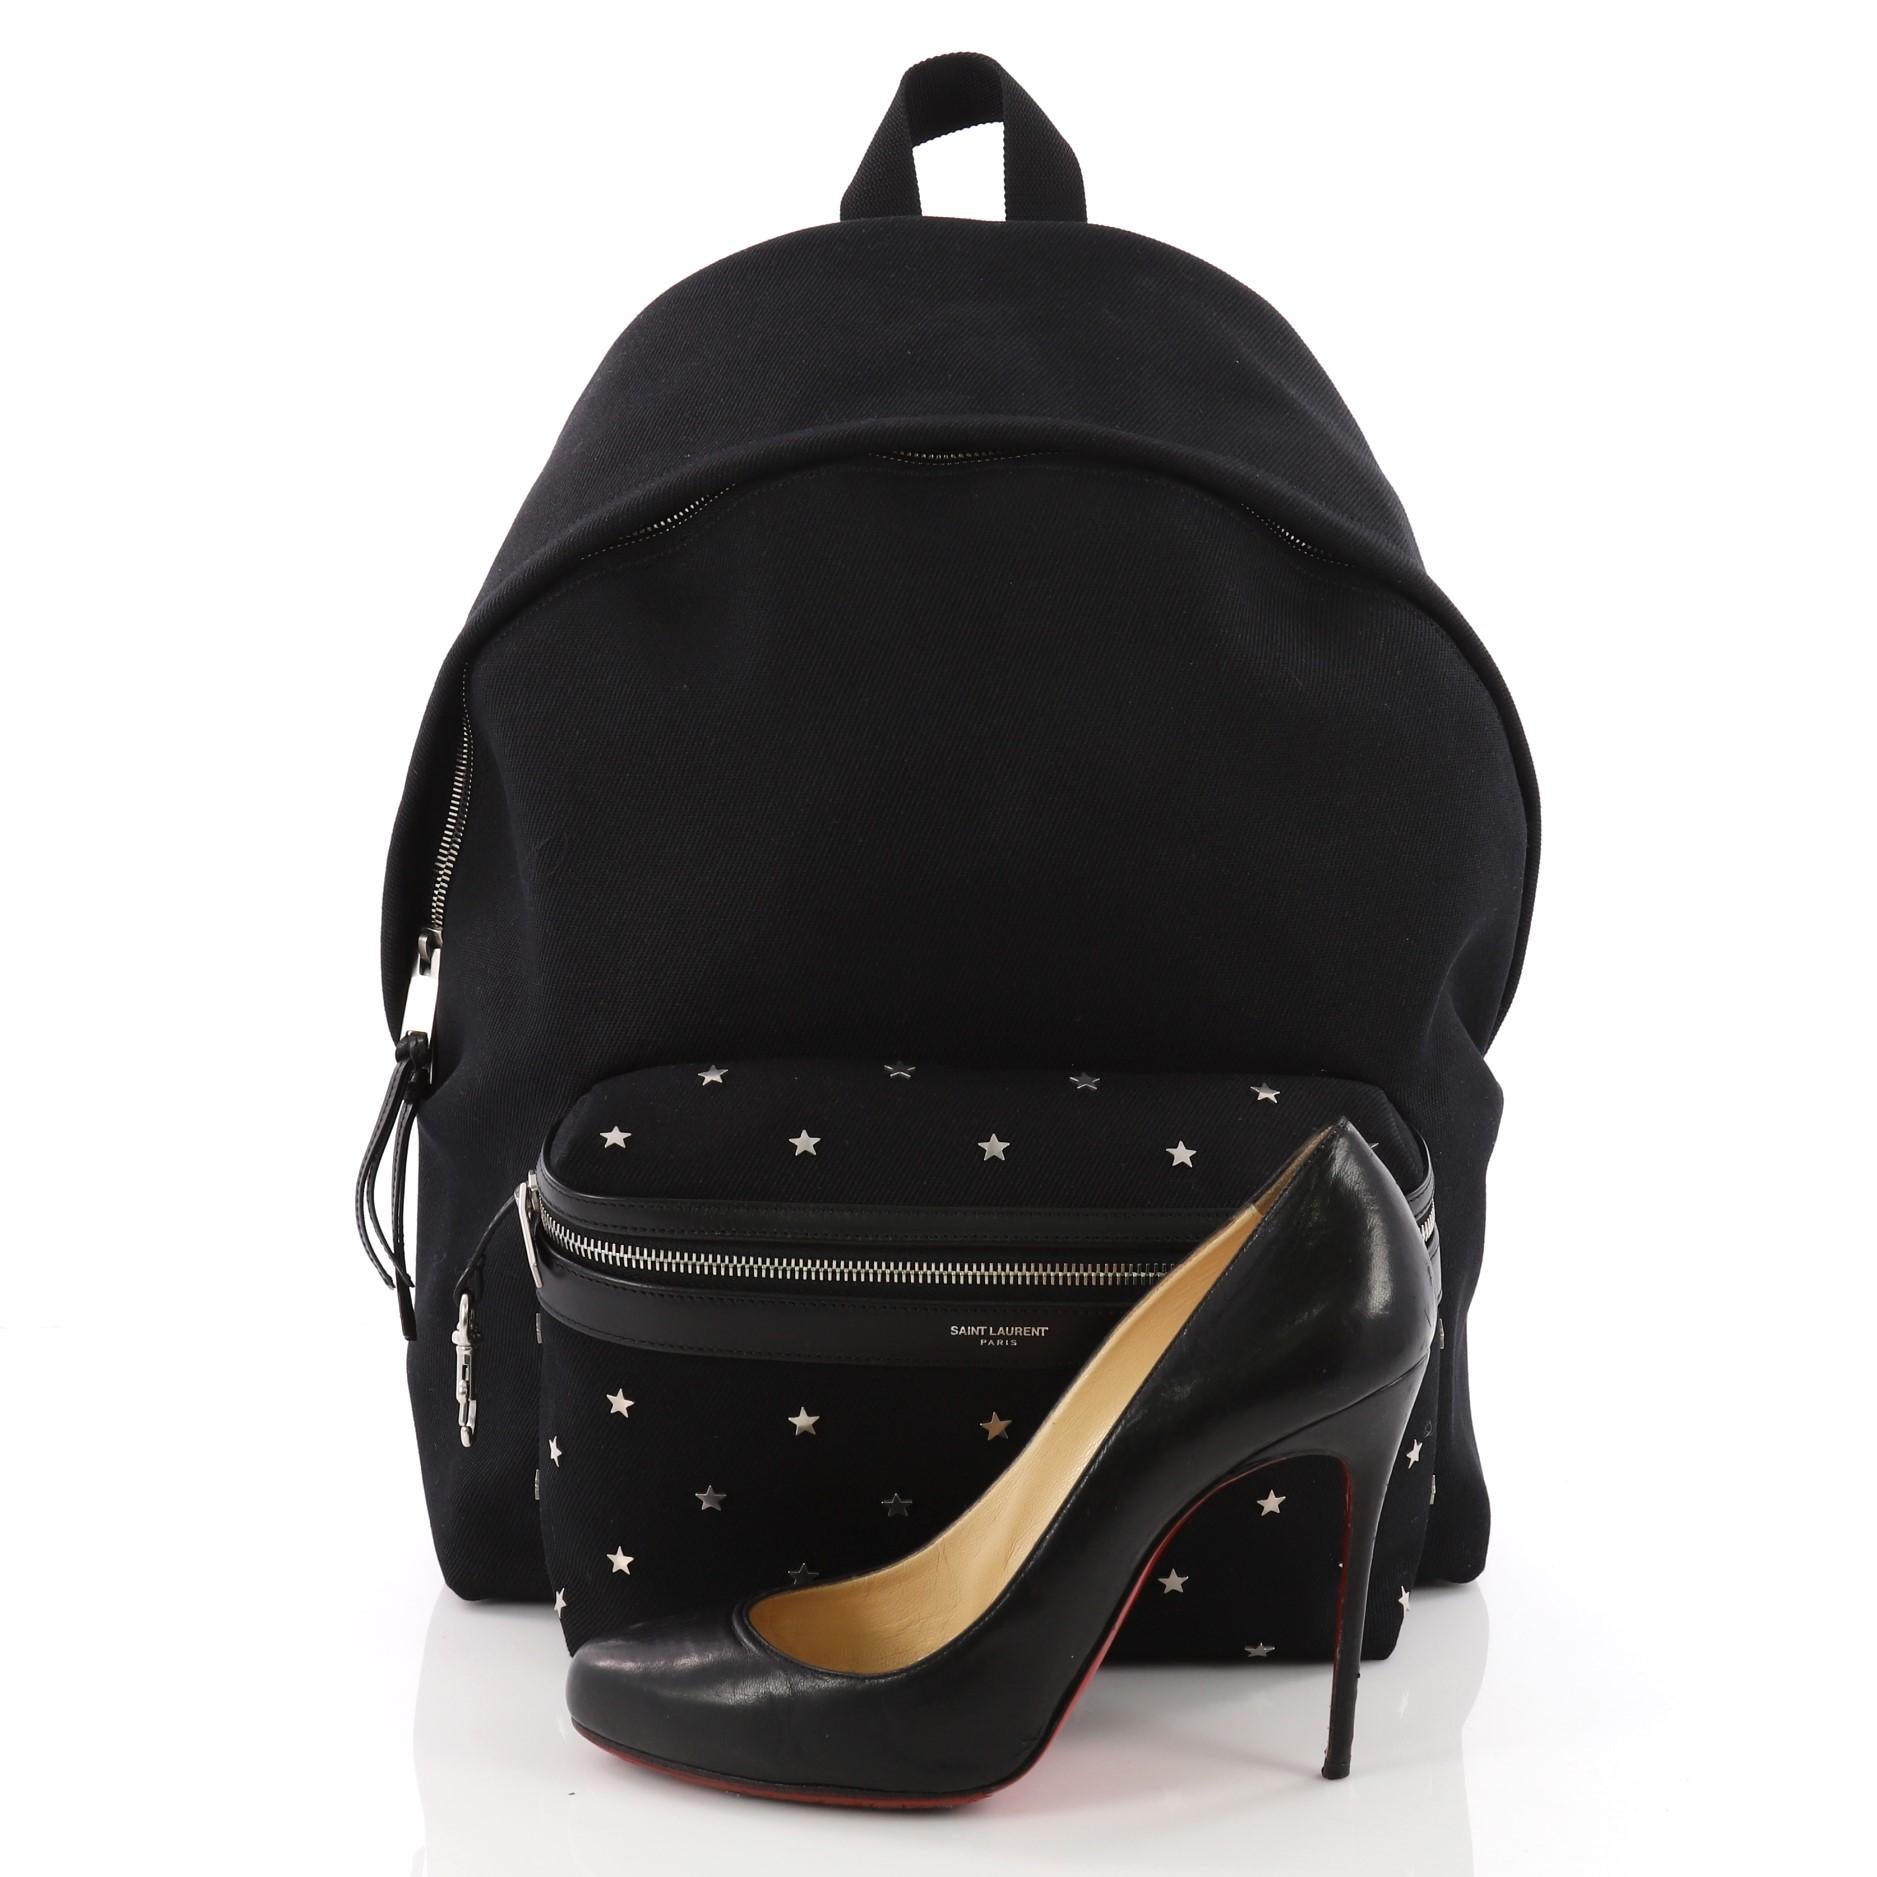 This authentic Saint Laurent City Backpack Canvas with Applique Medium is an eye-catching and luxurious style made for on-the-go fashionistas. Crafted from black canvas with star applique, this unique bag features, adjustable padded strap, exterior